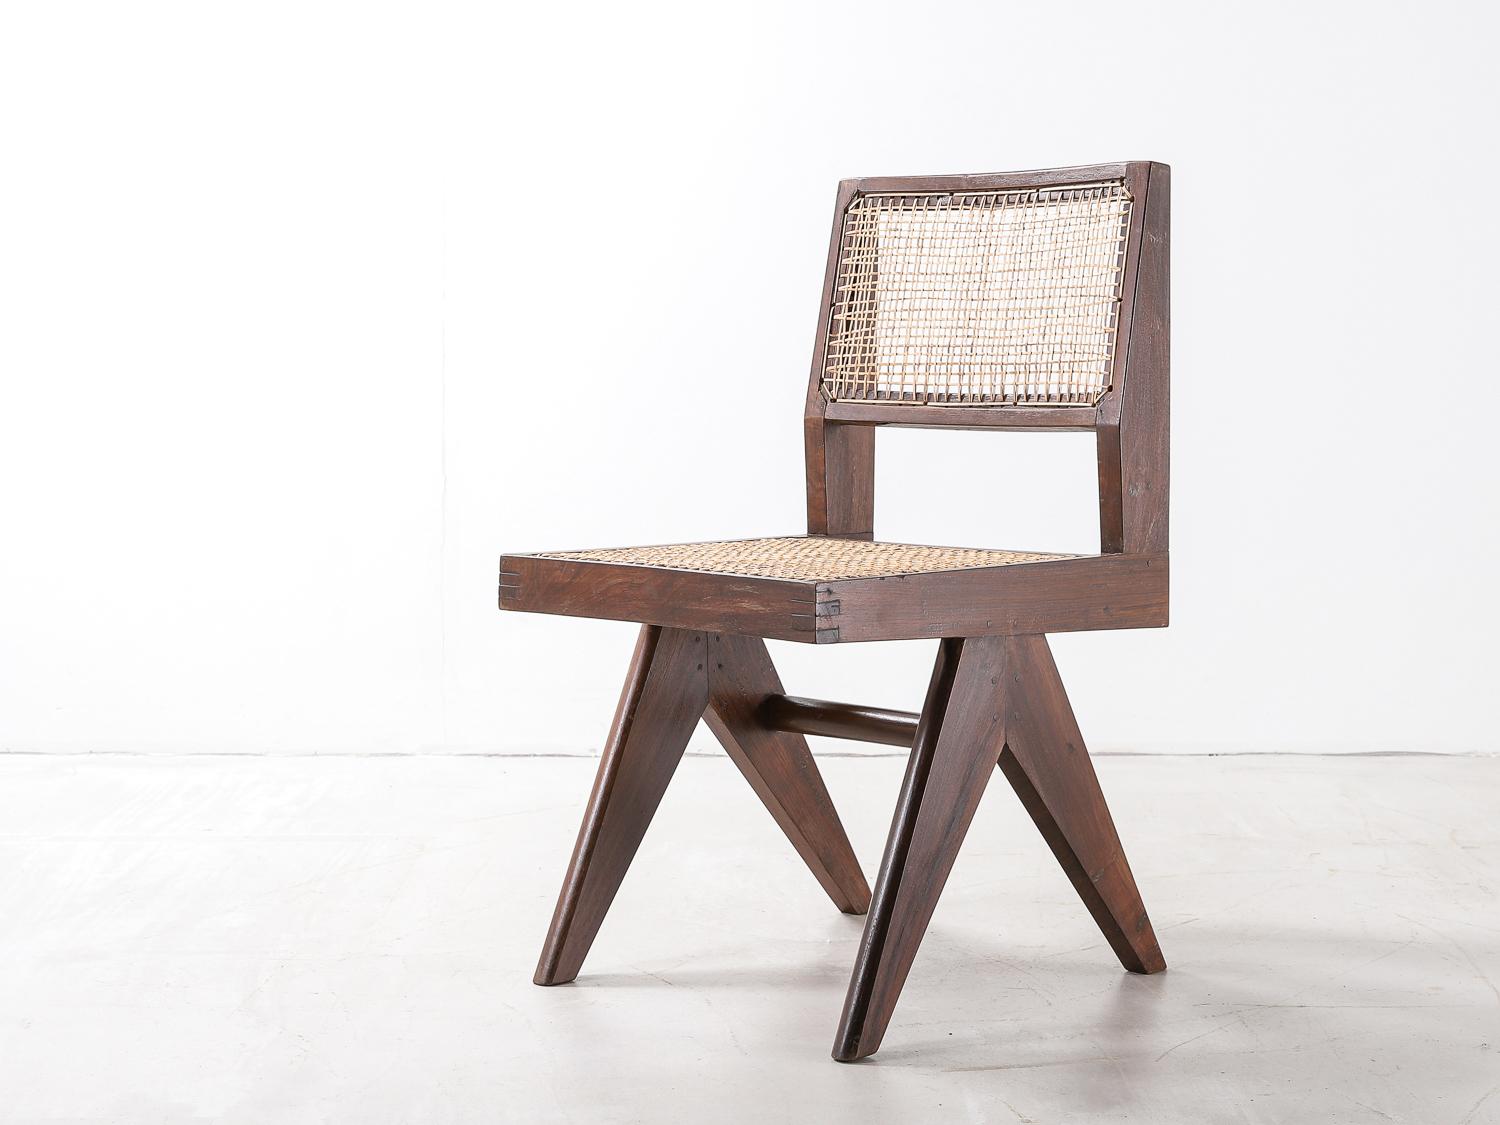 A Pierre Jeanneret ‘Student’ chair, model no. PJ-SI-25-A, in teak and rattan. Designed for the University of Panjab, Chandigarh, India, c.1958-1959.